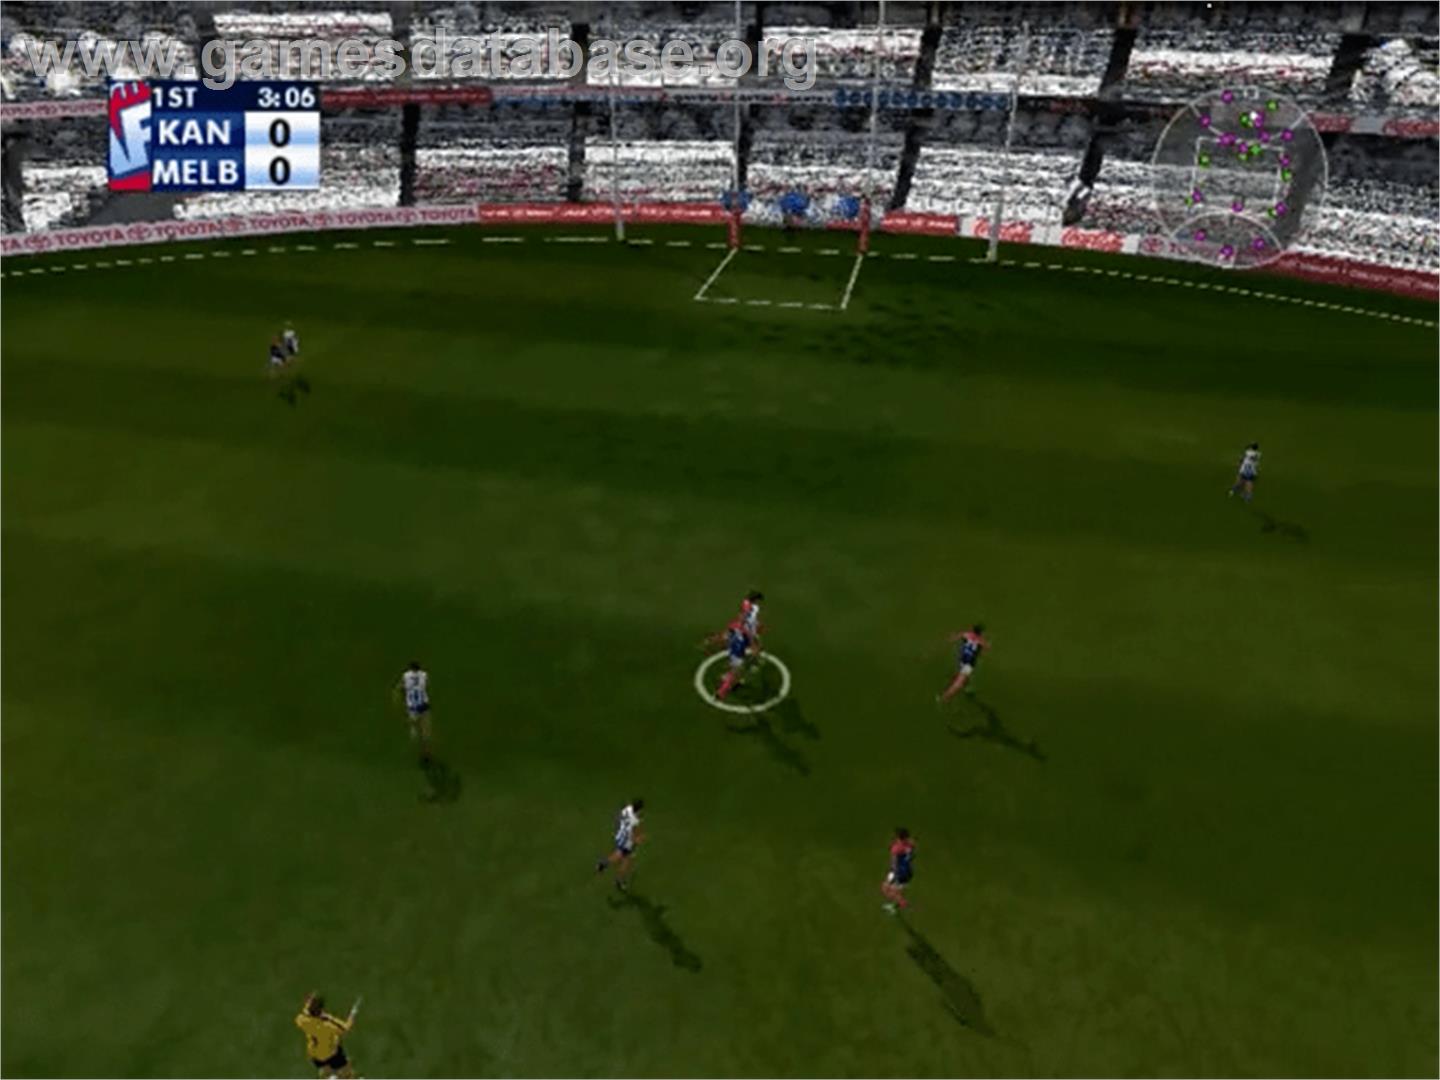 AFL Live Premiership Edition - Sony Playstation 2 - Artwork - In Game